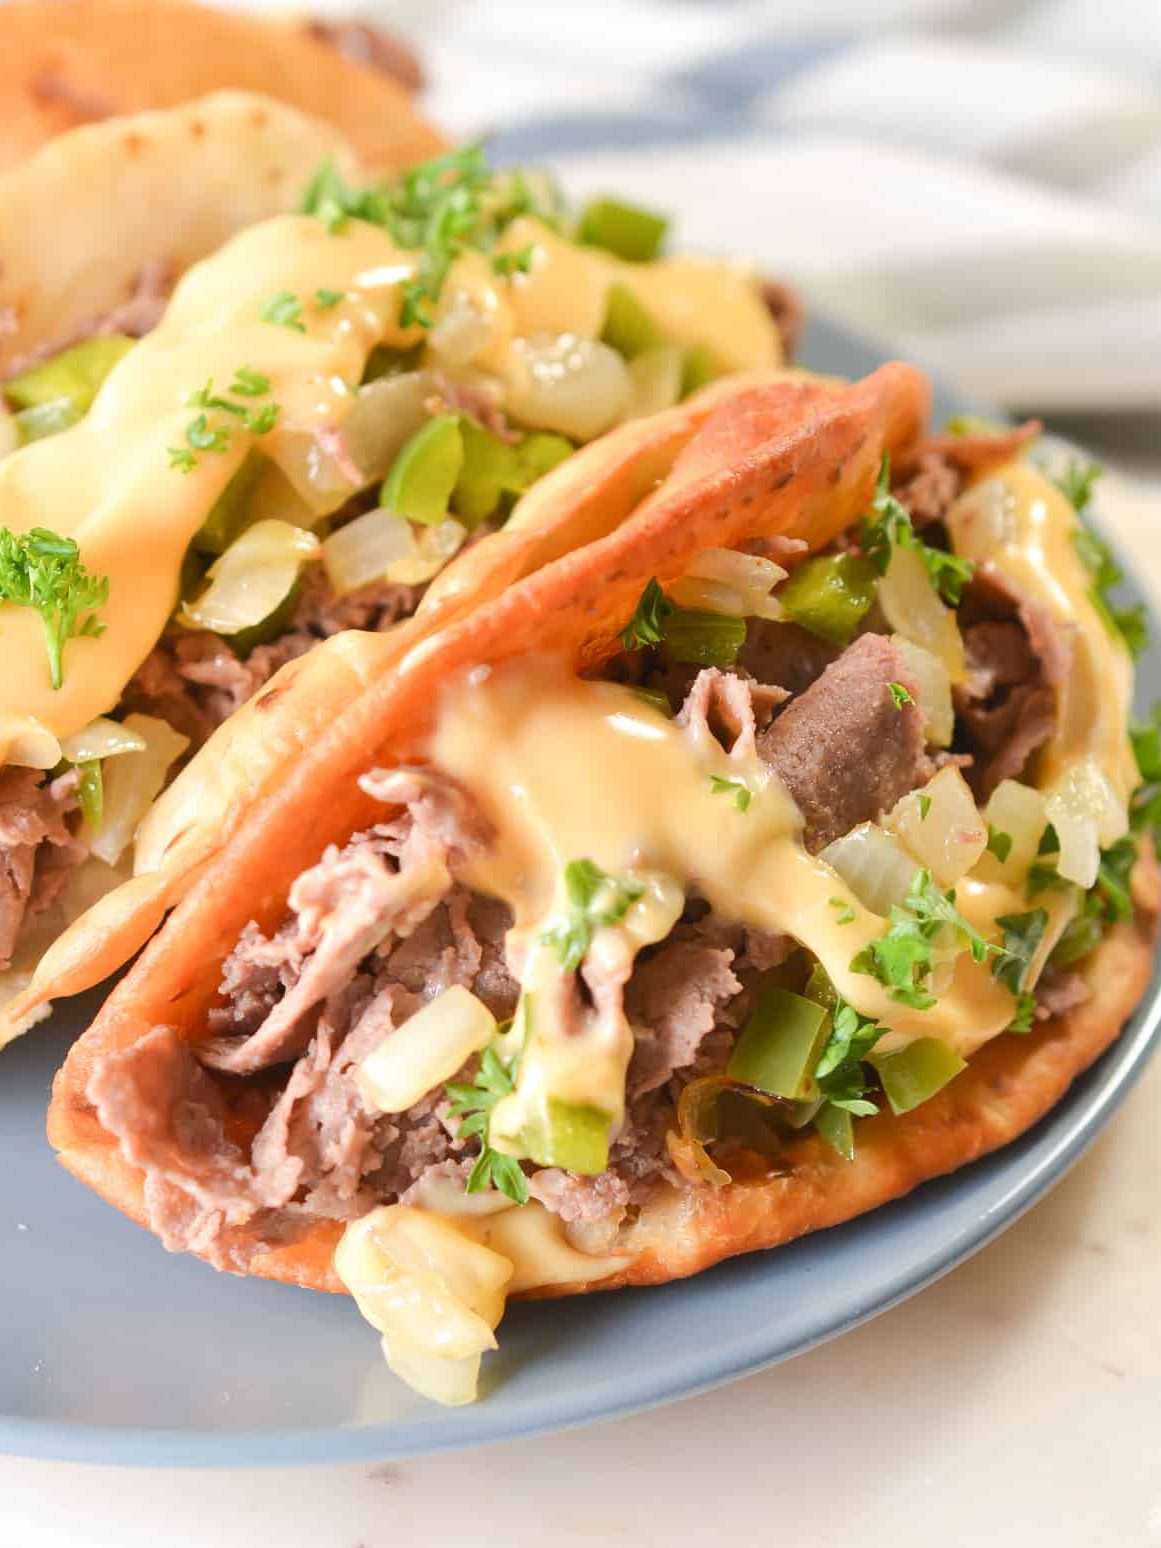 Philly Cheesesteak Tacos